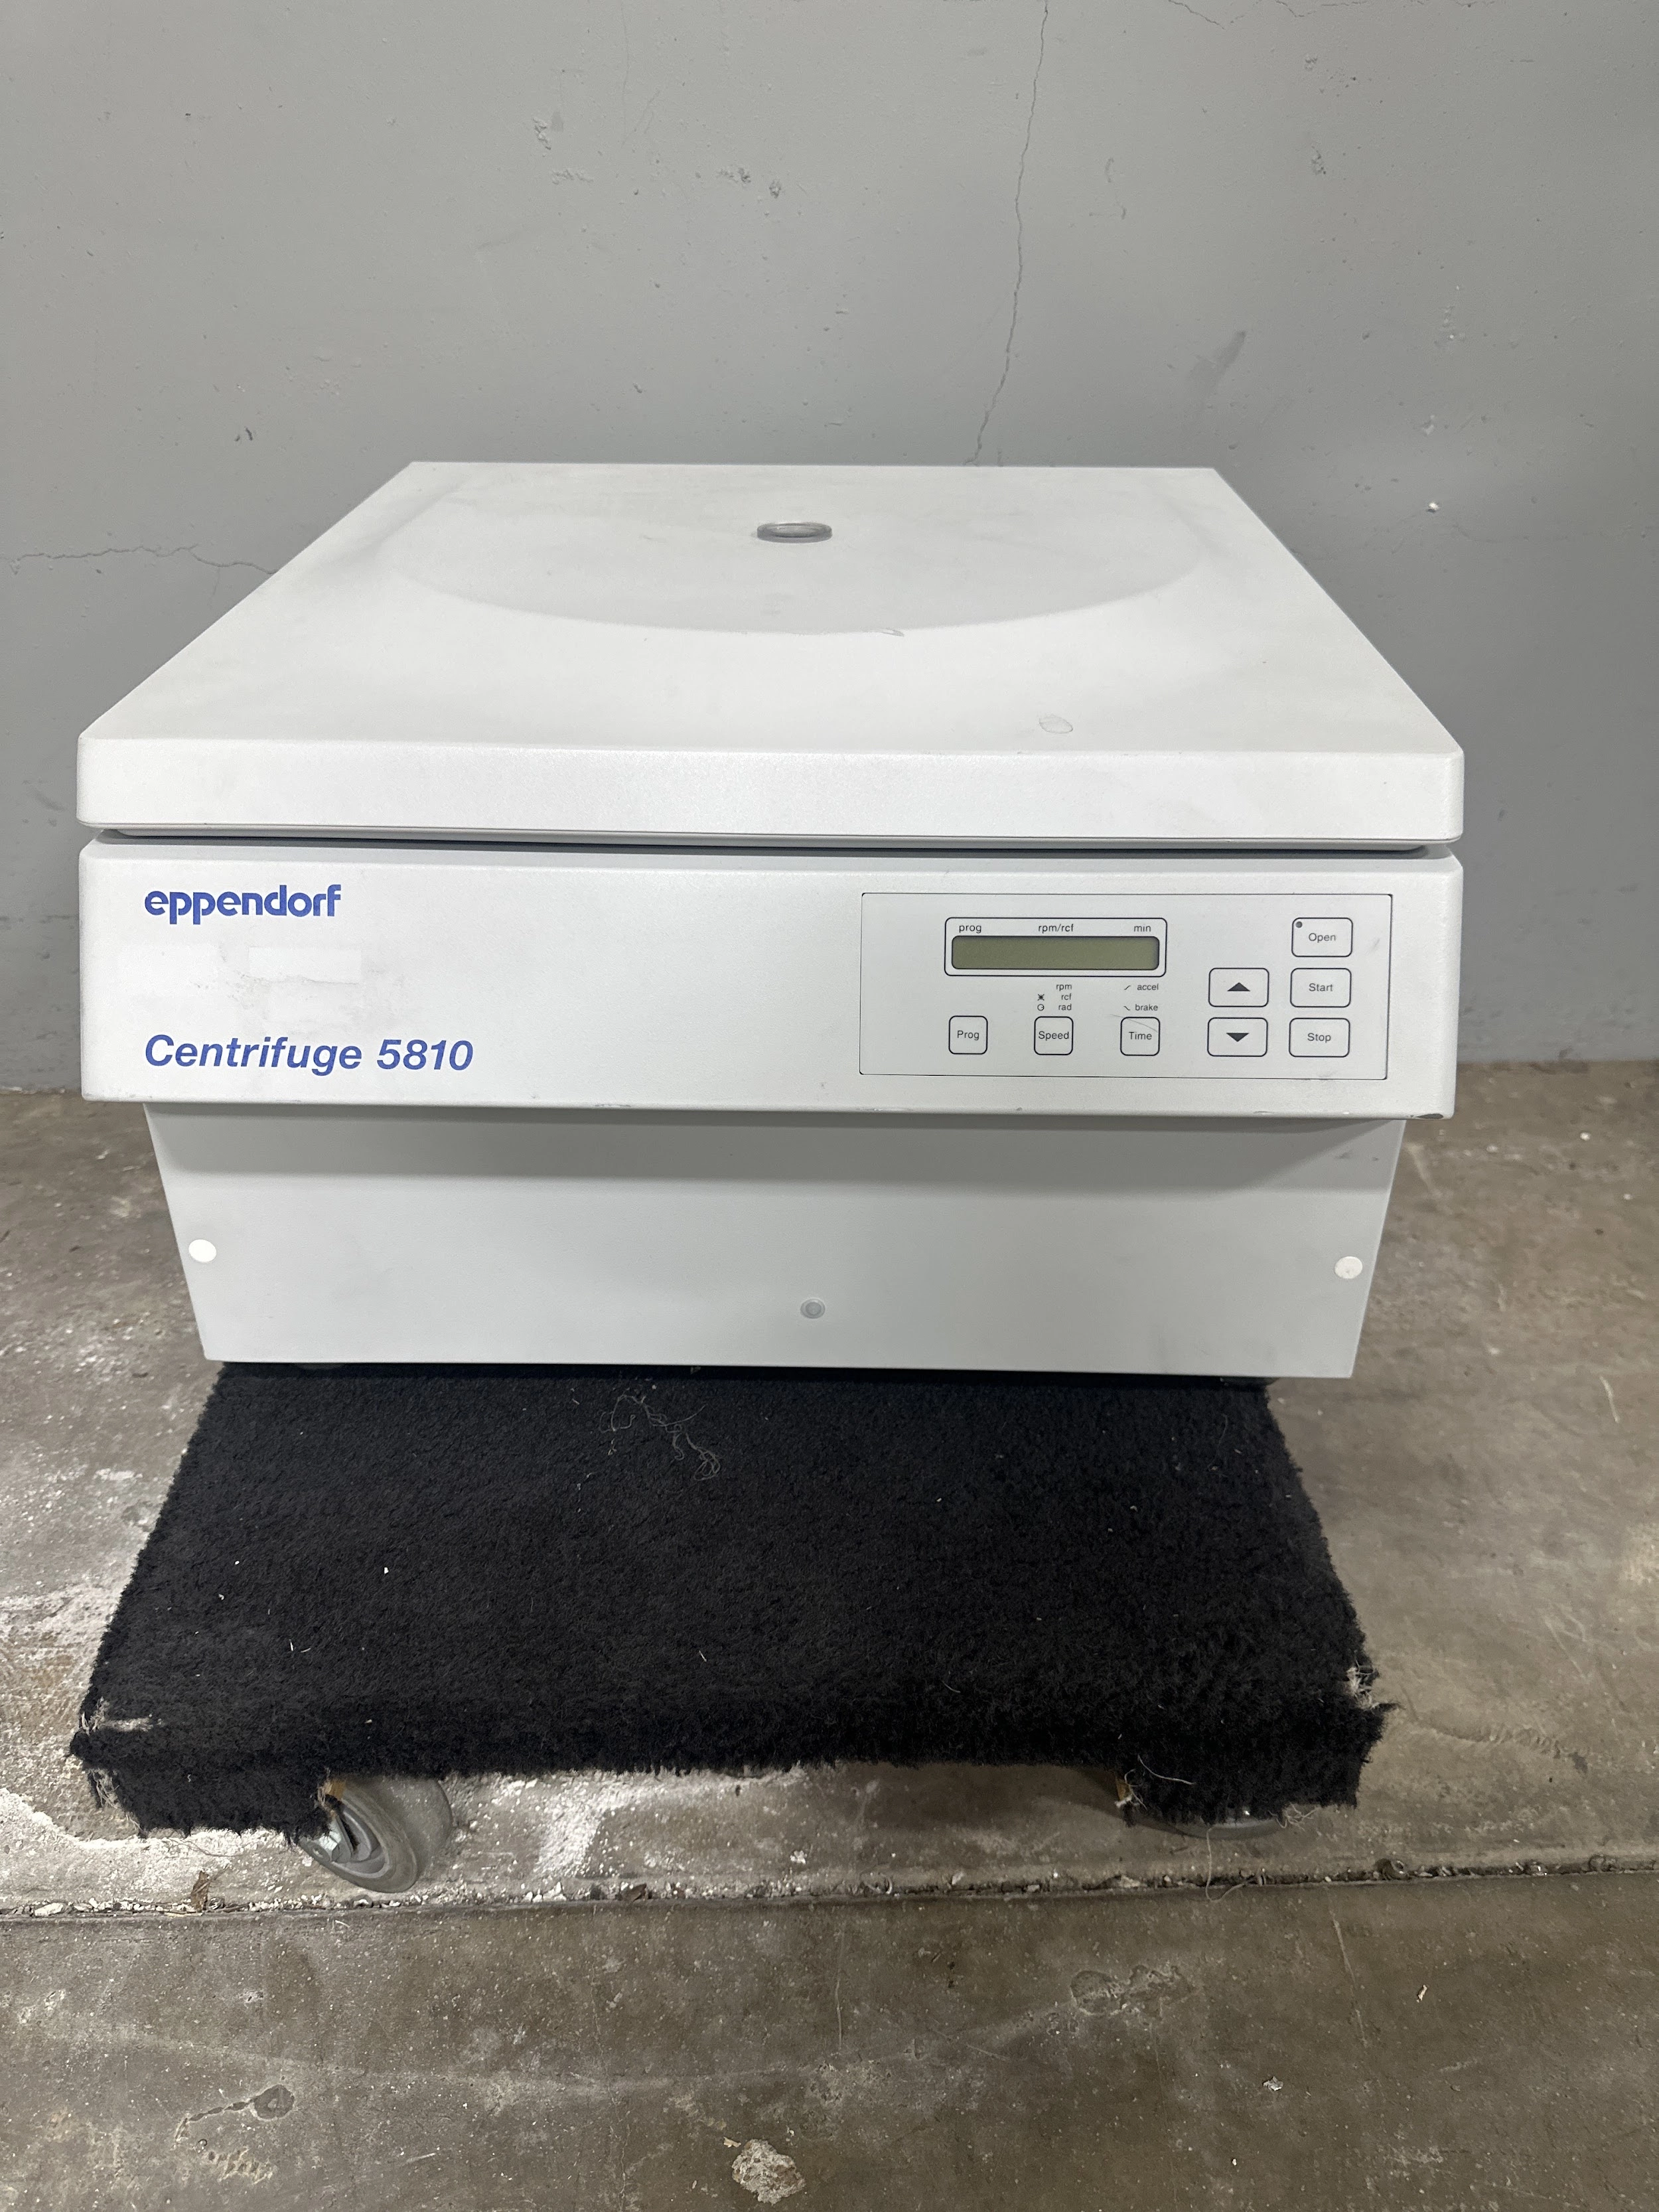 Eppendorf 5810 High-Speed Benchtop Centrifuge W/ A-4-62 Rotor, Buckets, Inserts